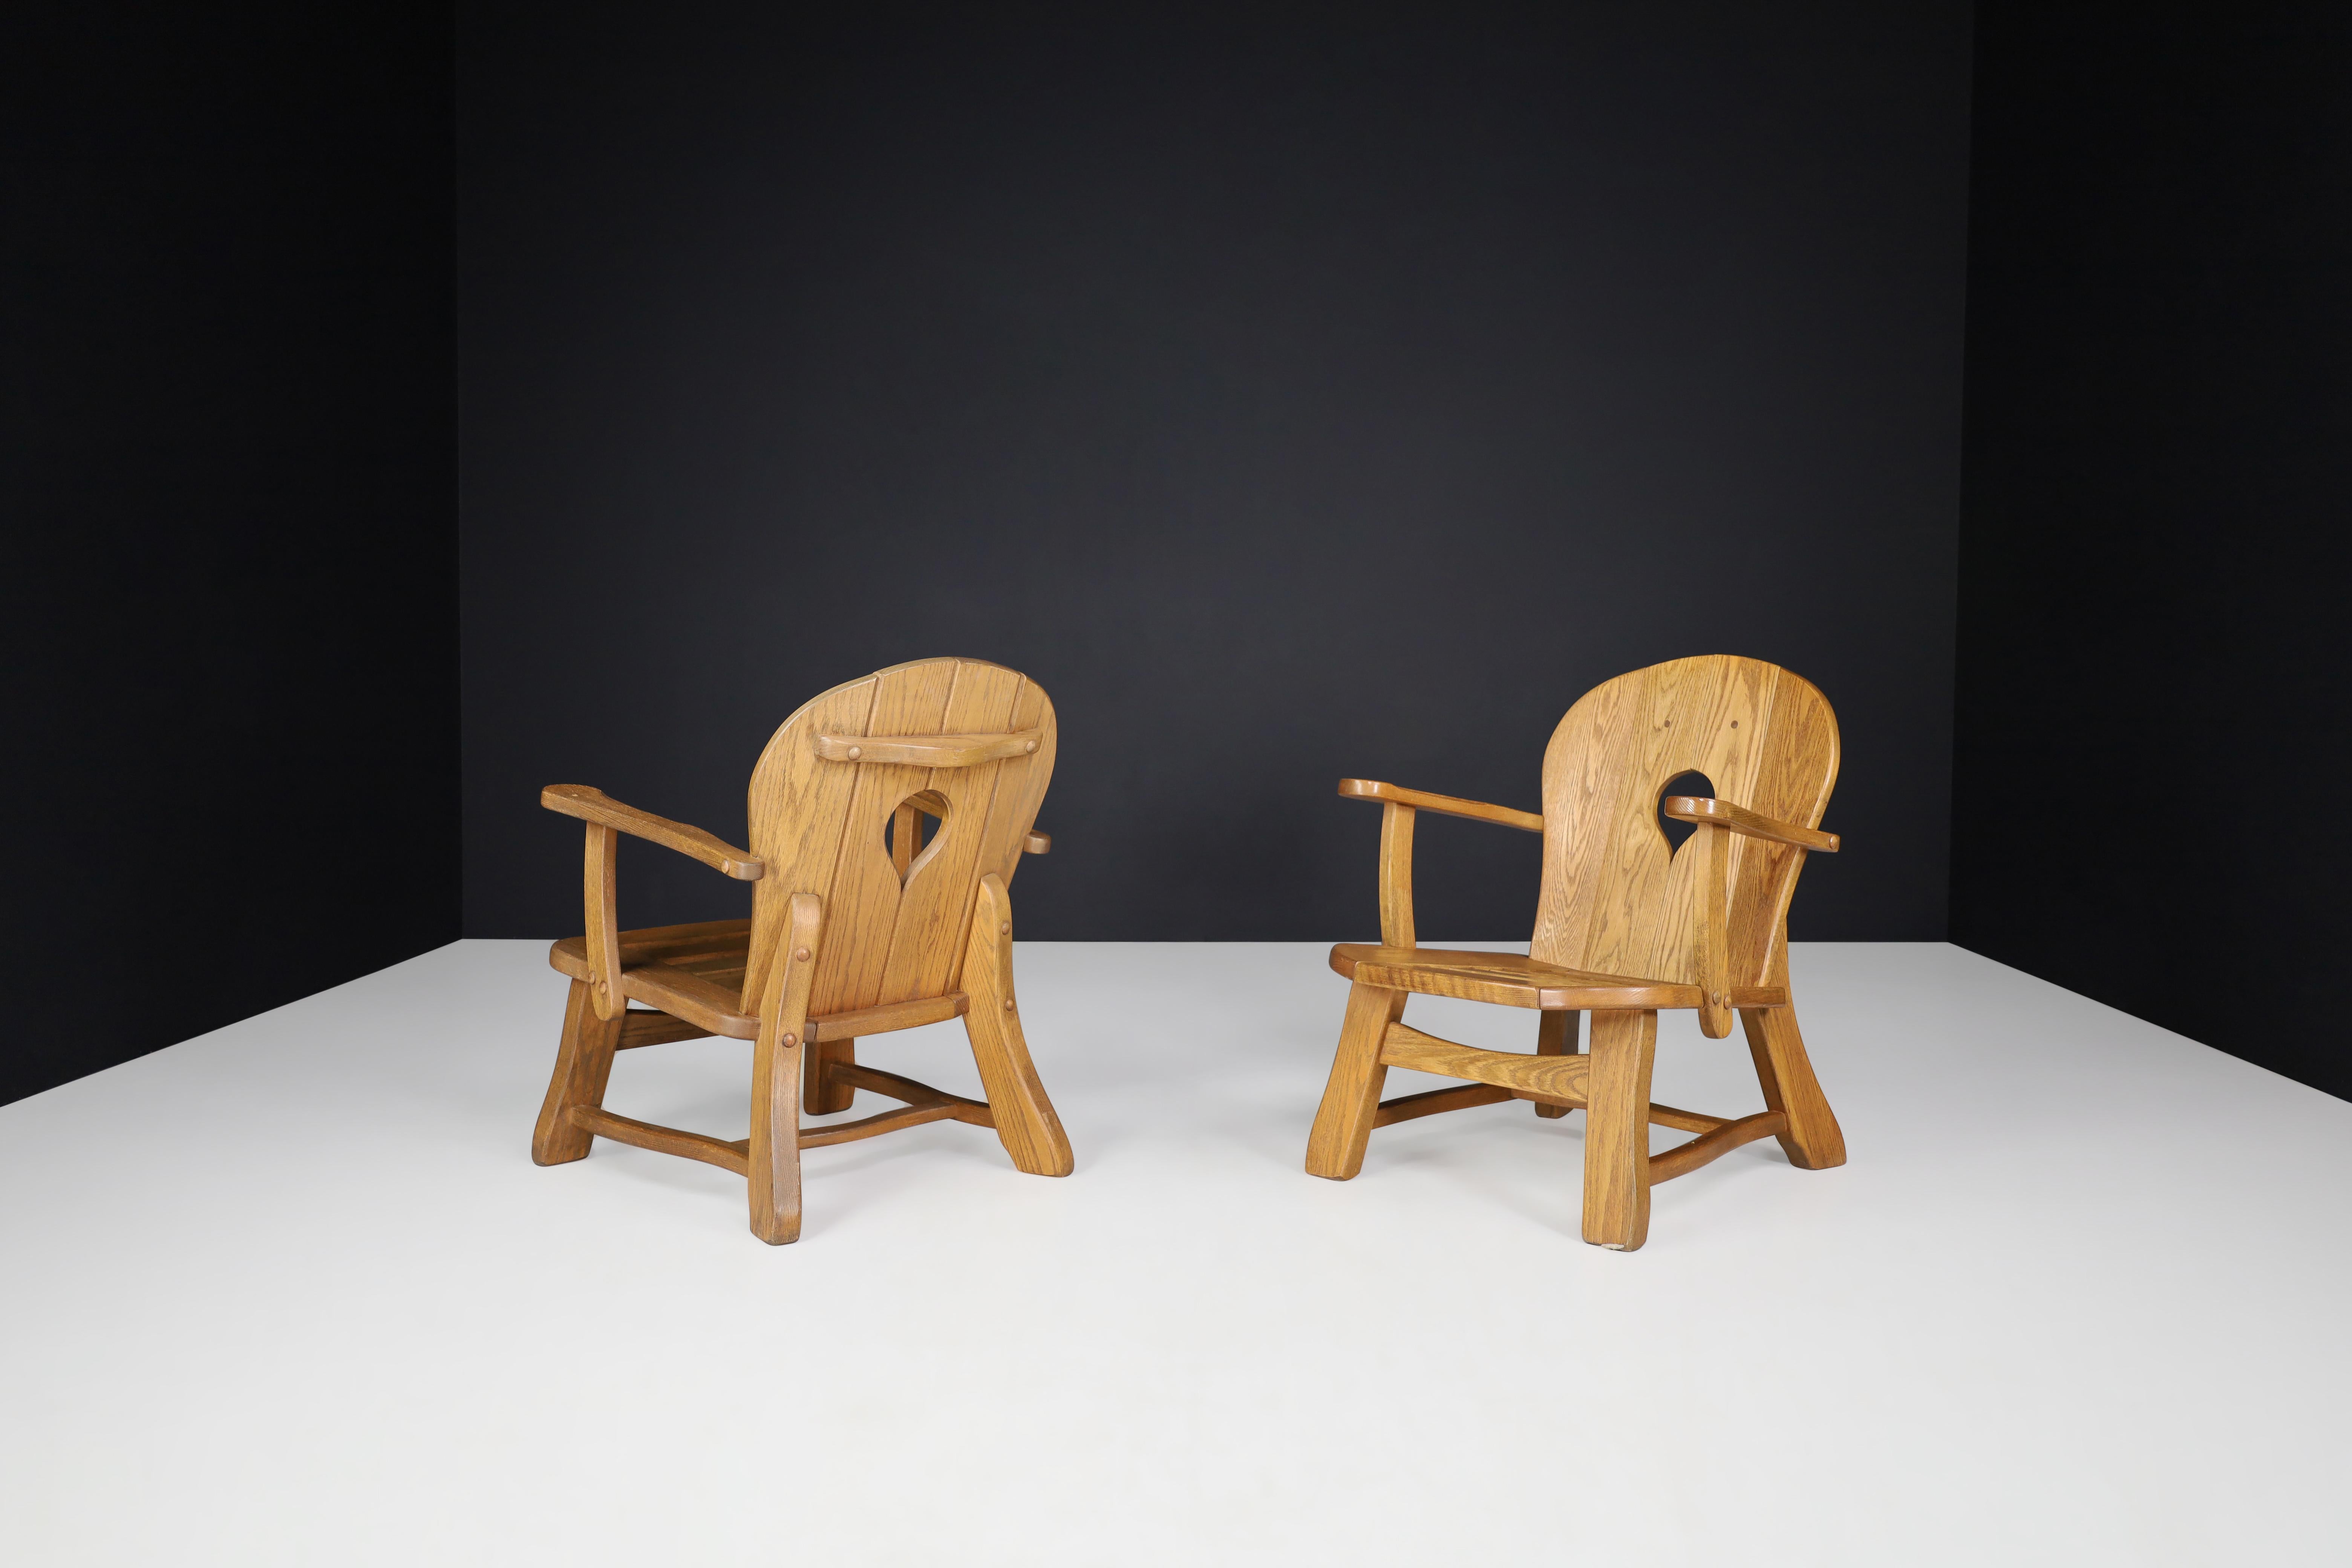 Sculptural Lounge Chairs in Oak, France, 1960s For Sale 1